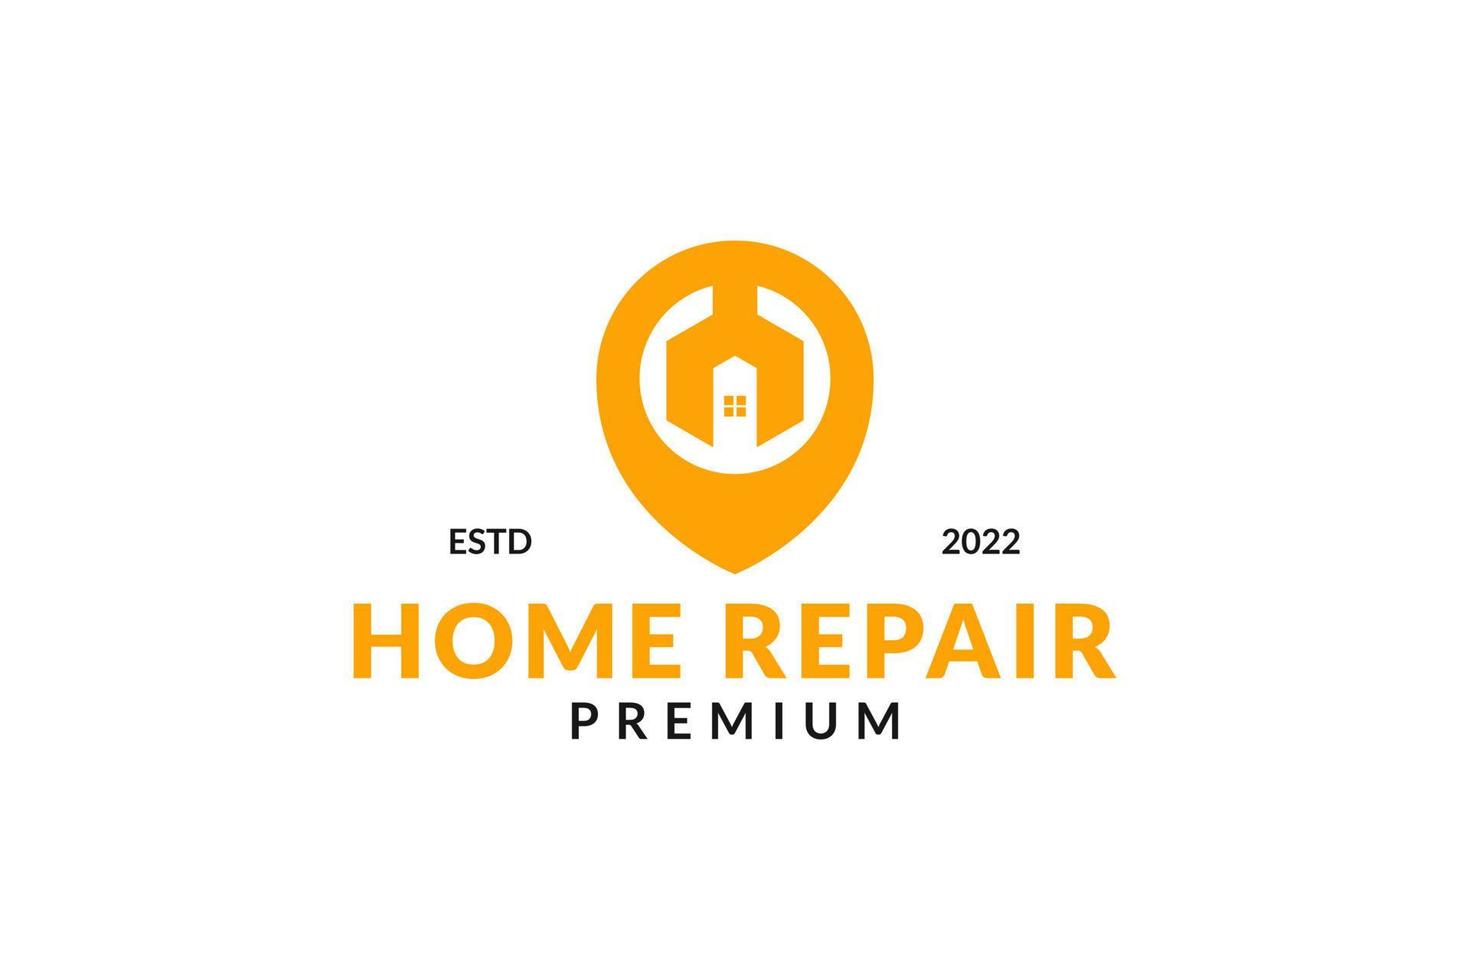 House repair logo. Wreck tool icon. Maintenance service sign. Isolated garage symbol vector